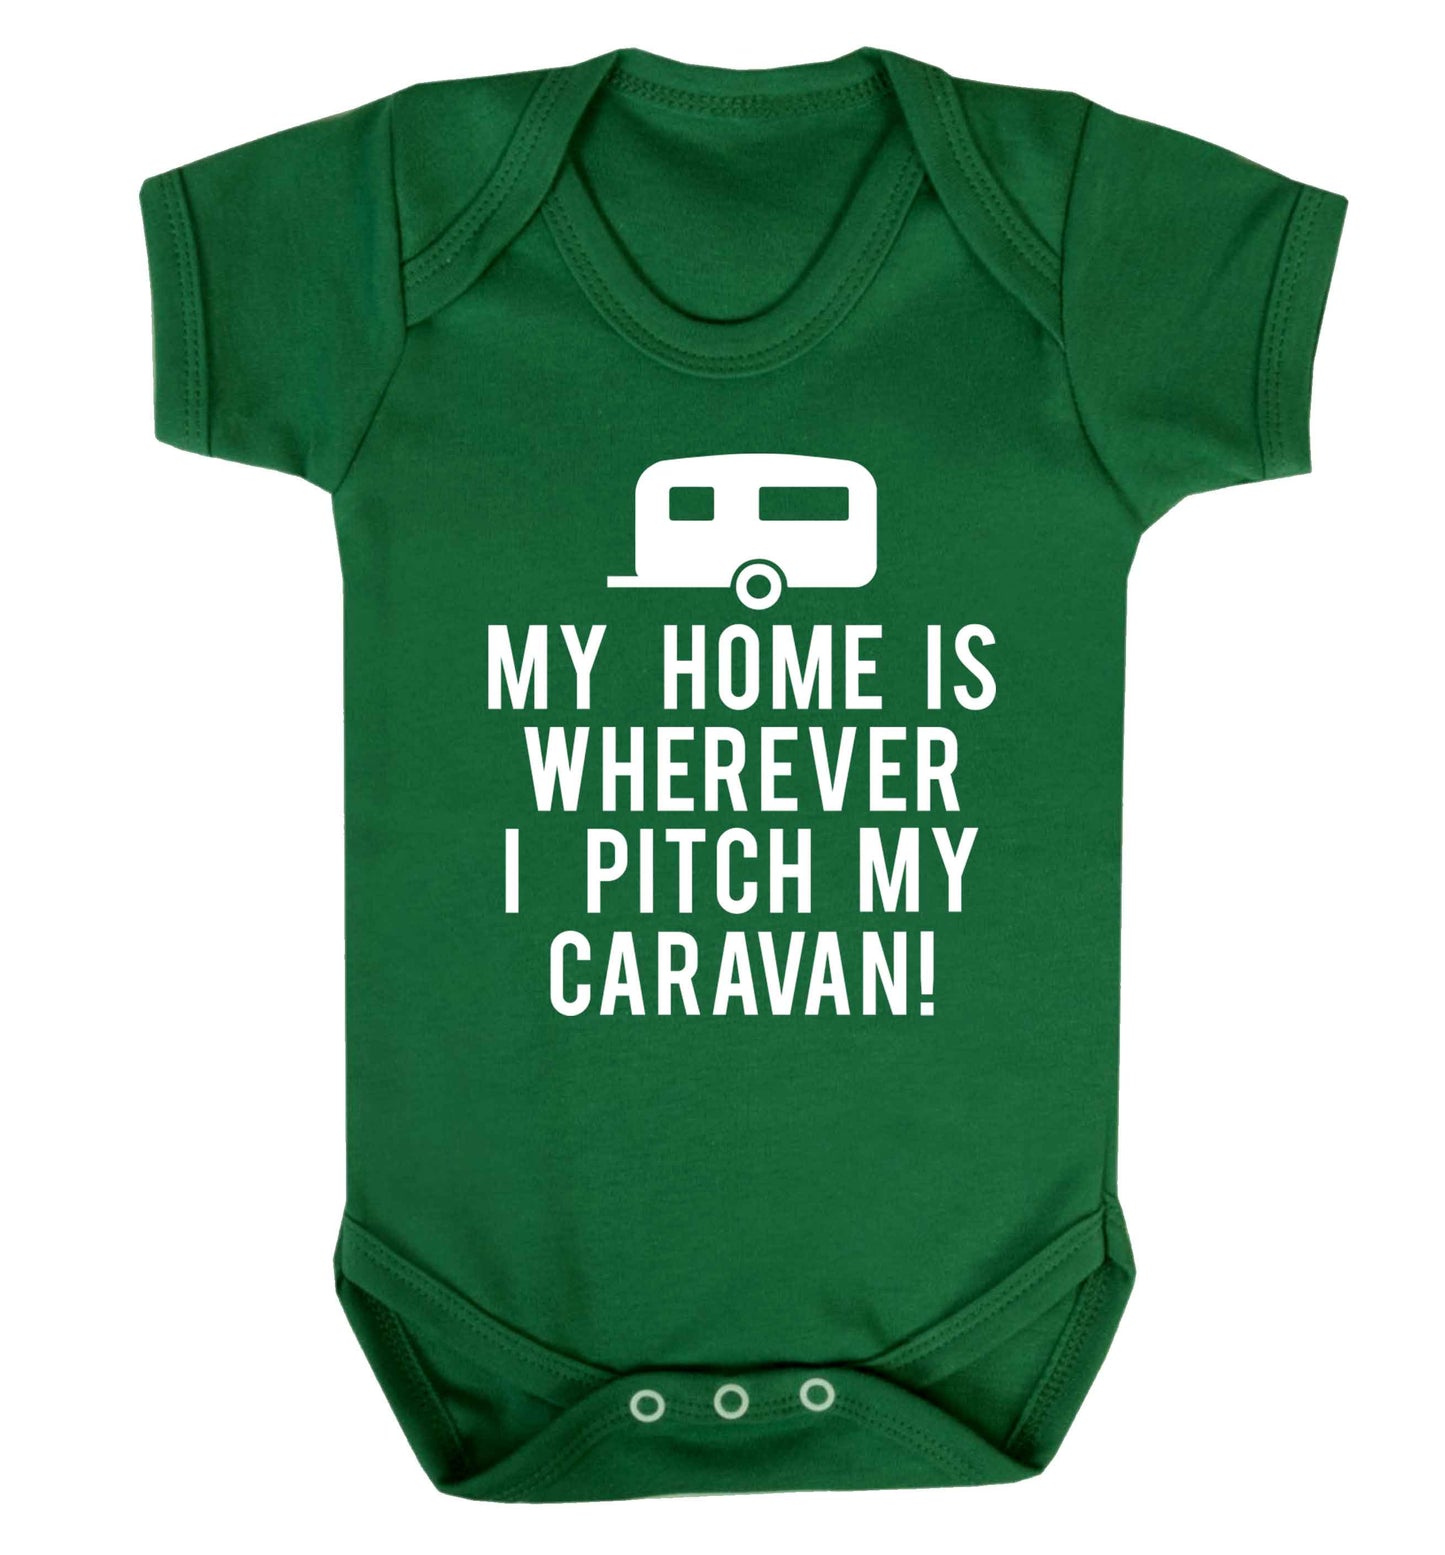 My home is wherever I pitch my caravan Baby Vest green 18-24 months